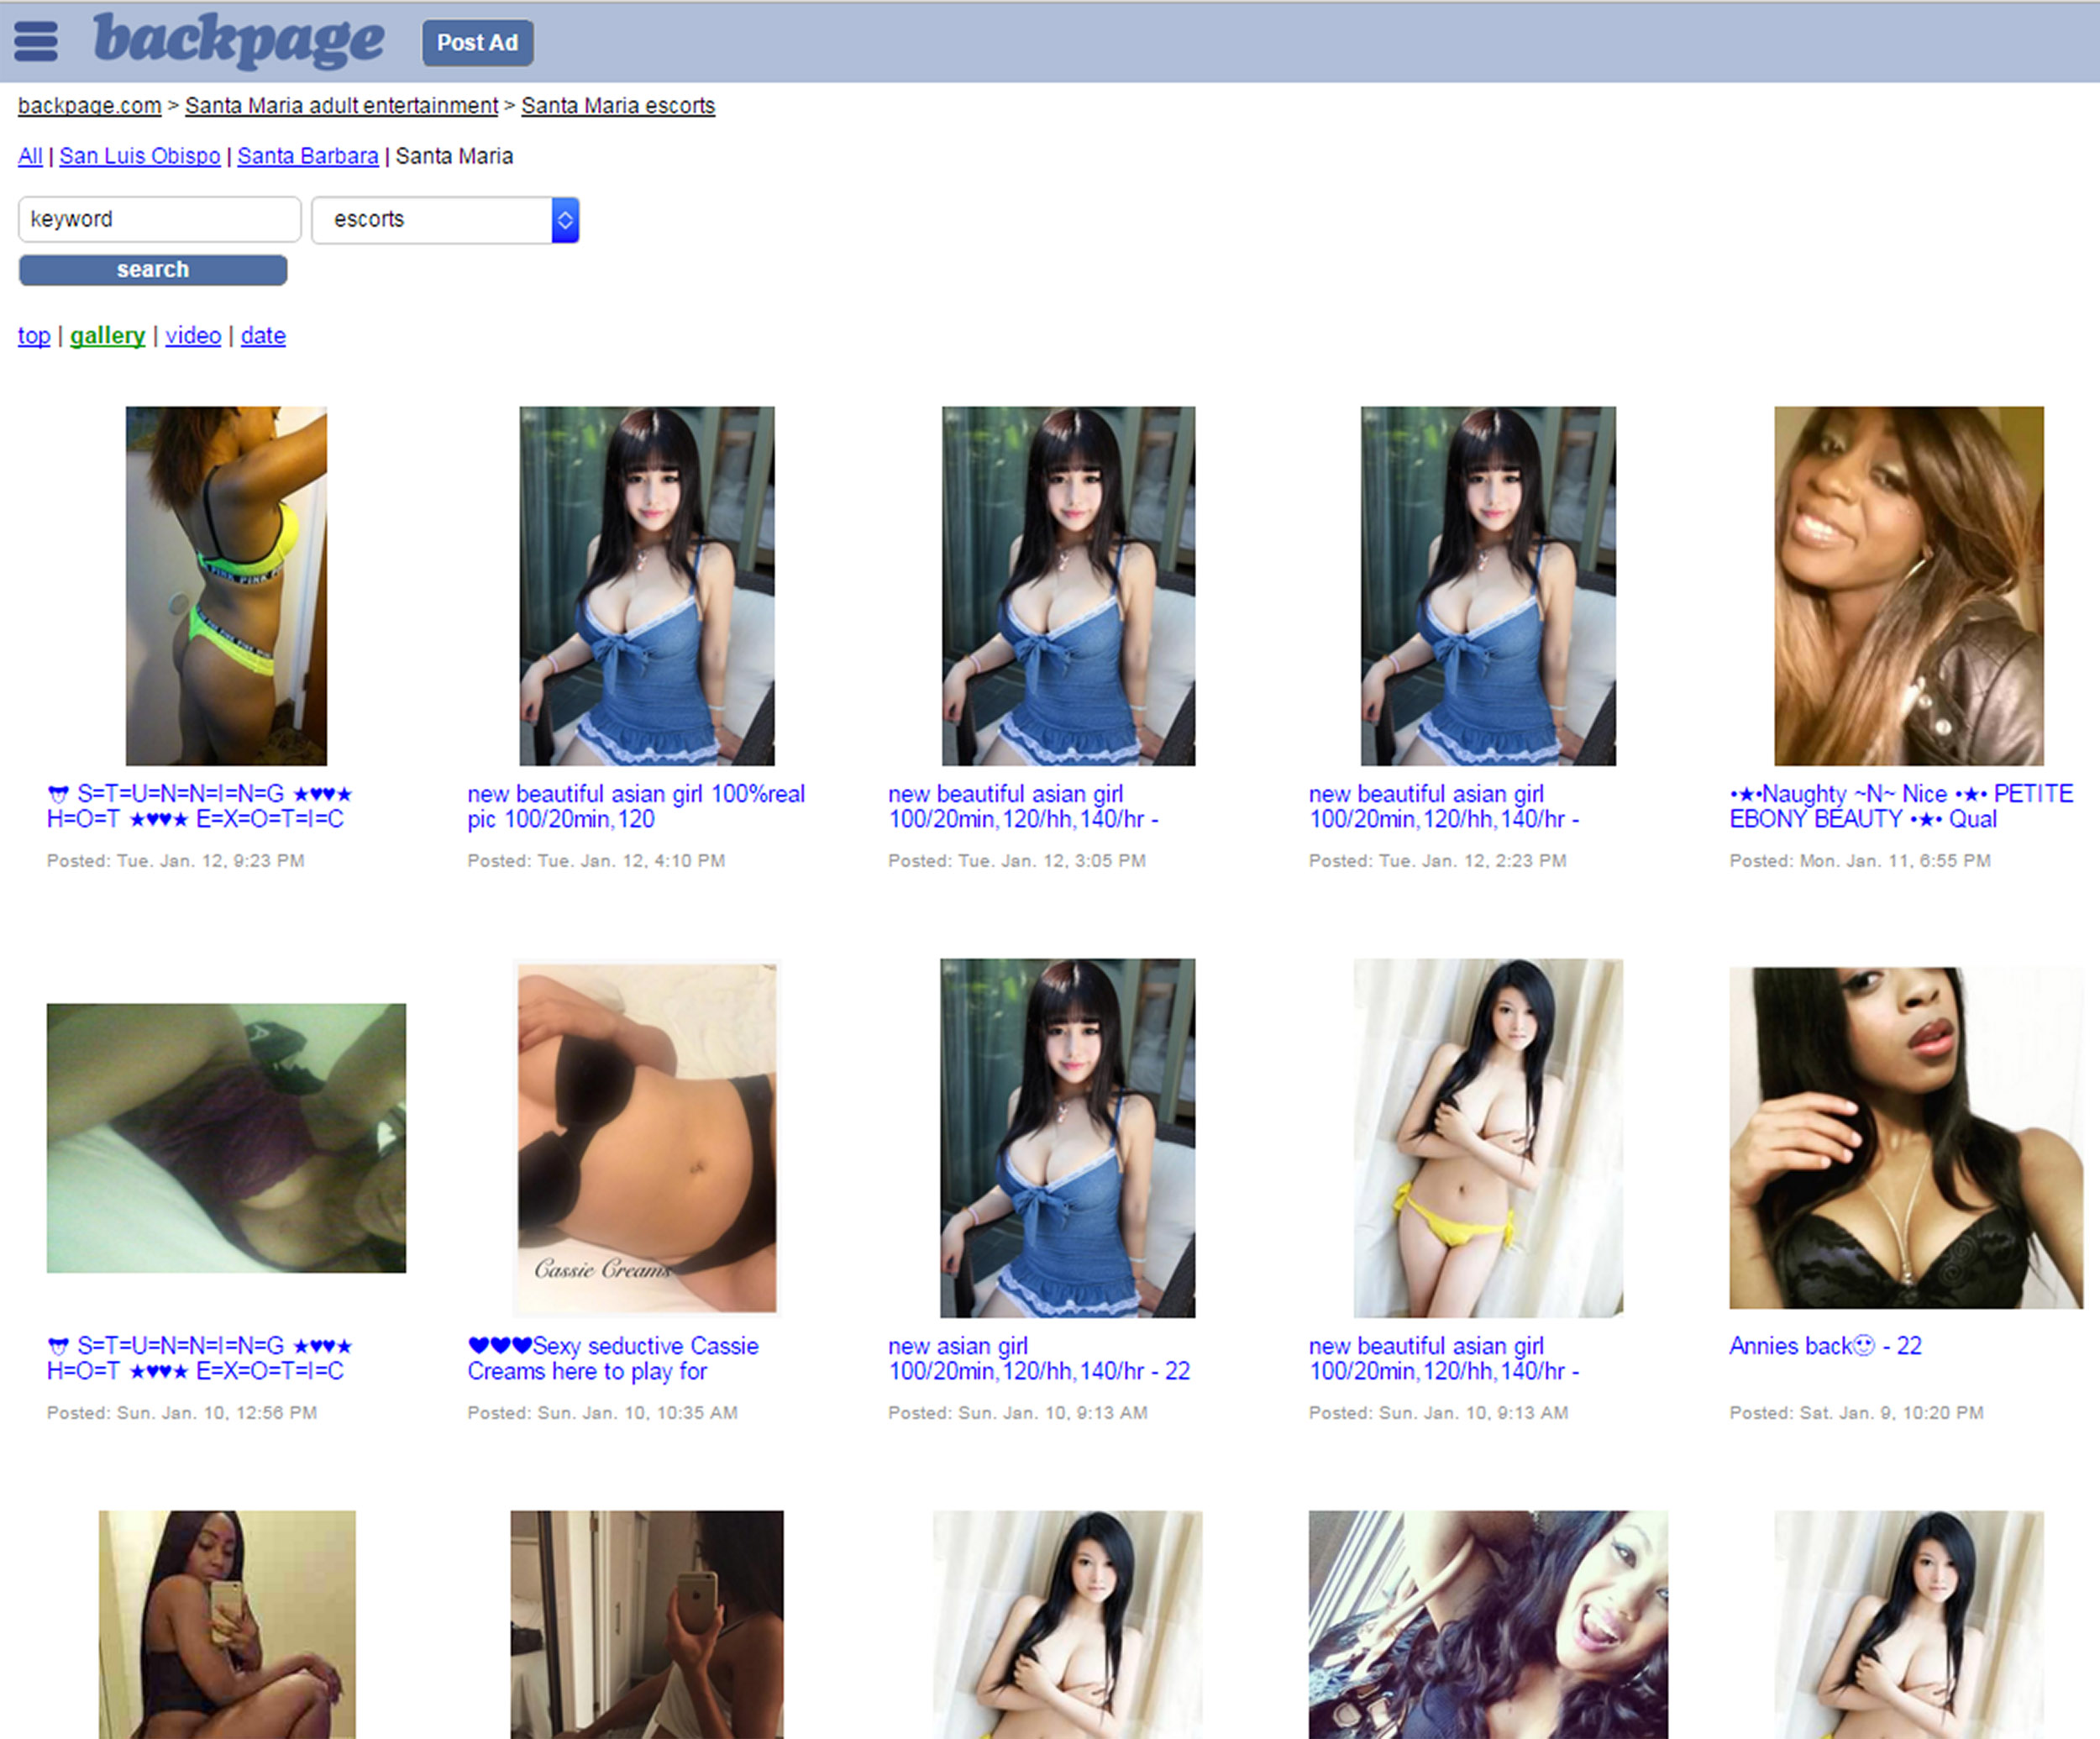 bryan tuastumban recommends asian girls on backpage pic